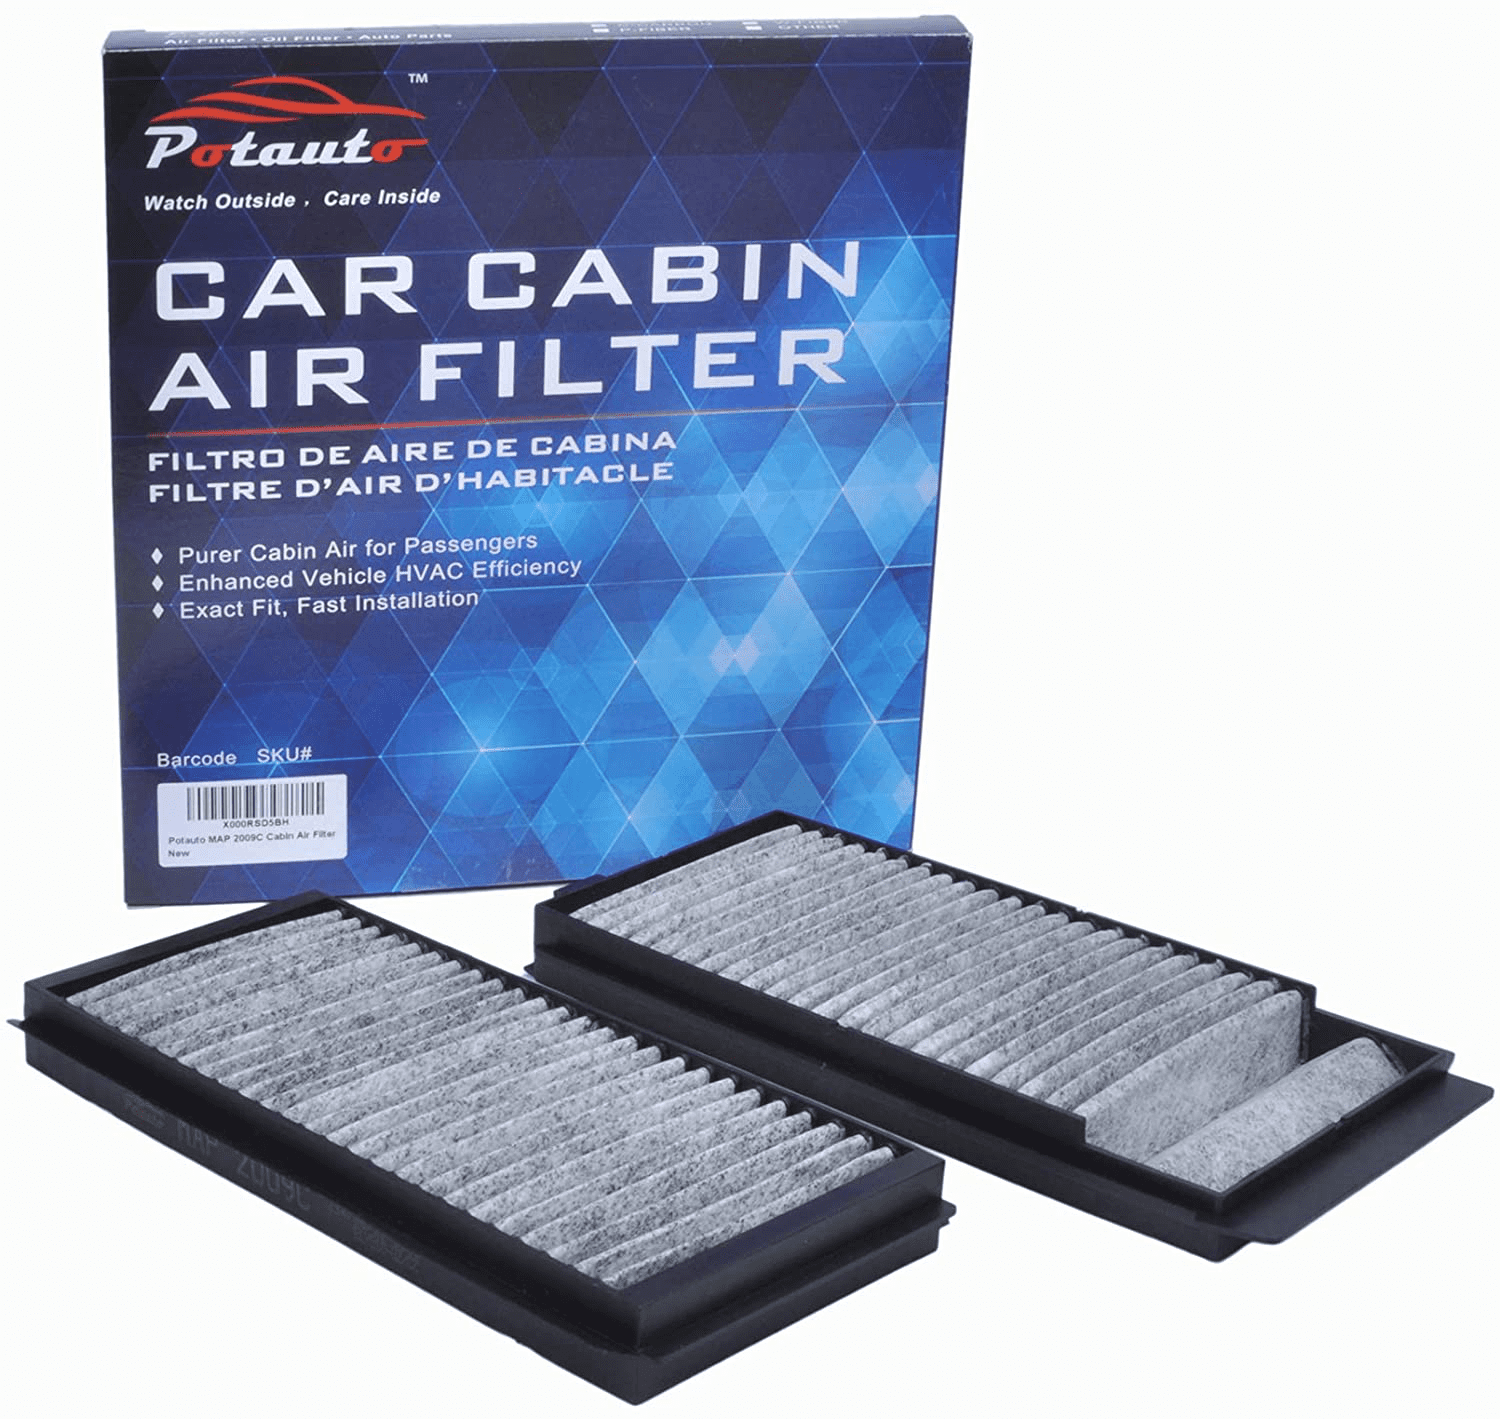 POTAUTO MAP 1021W Cabin Air Filter Replacement compatible for BUICK CADILLAC SAAB CHEVROLET 